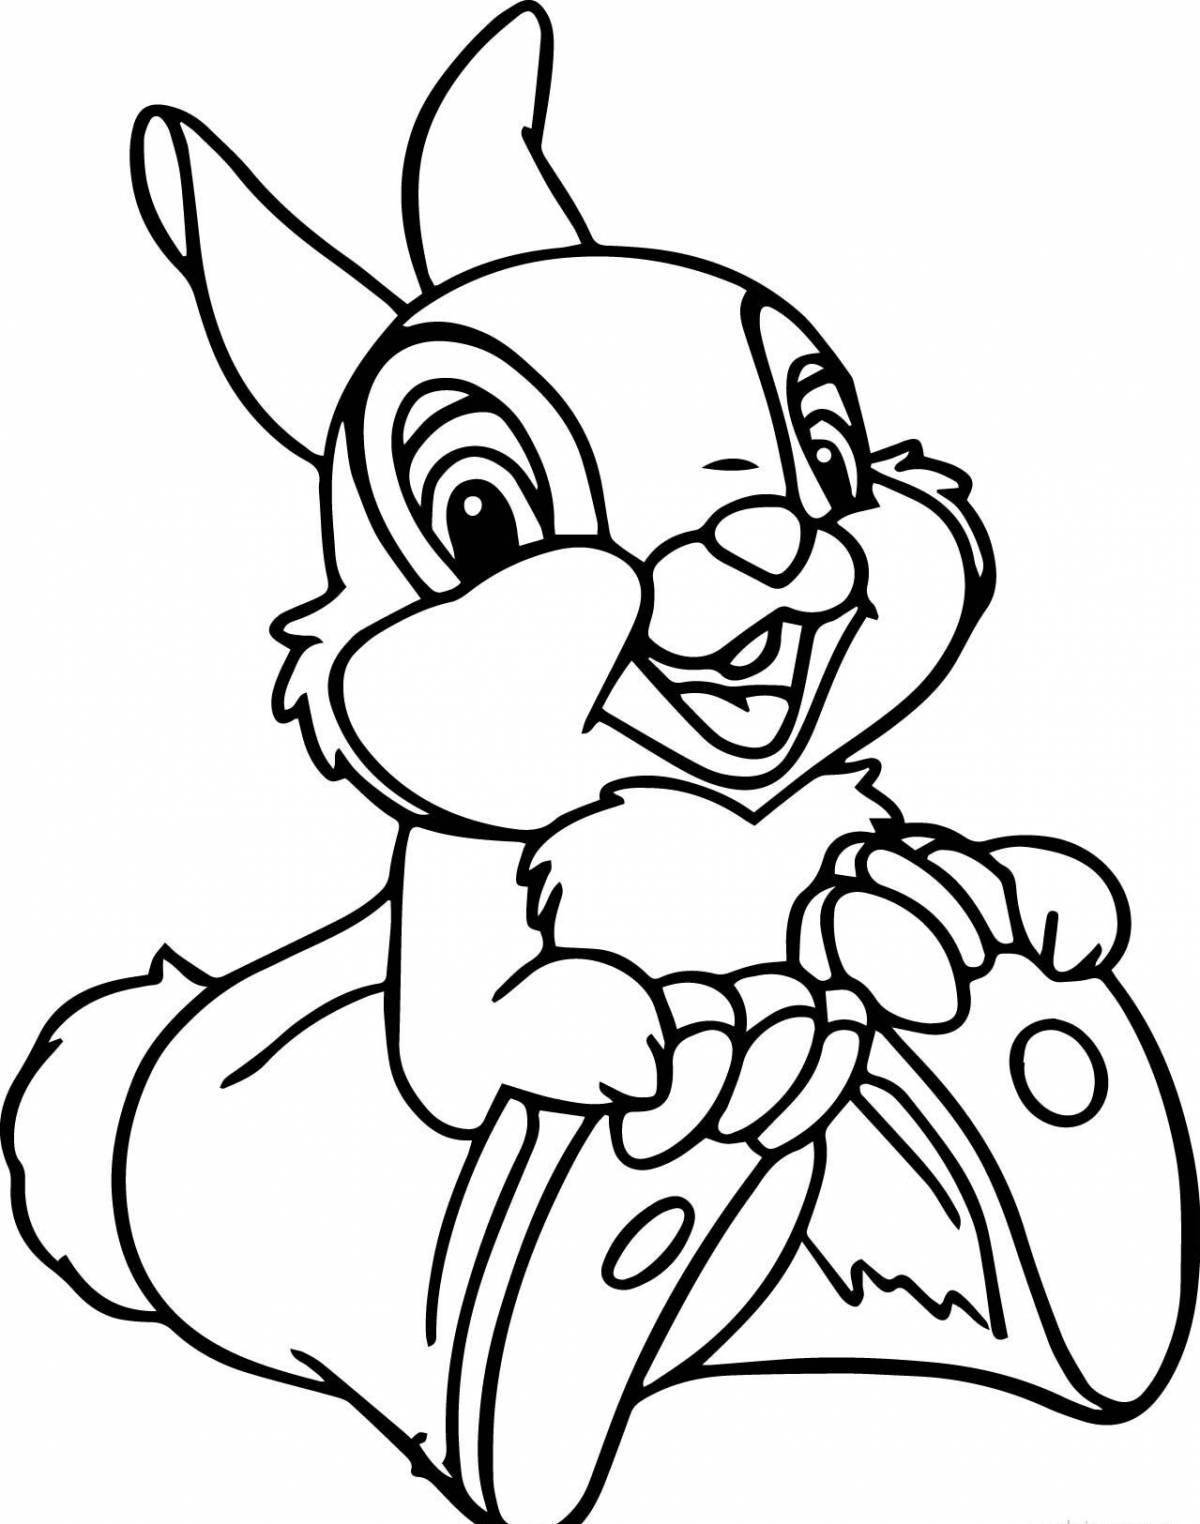 Ecstatic coloring hare 2023 new year